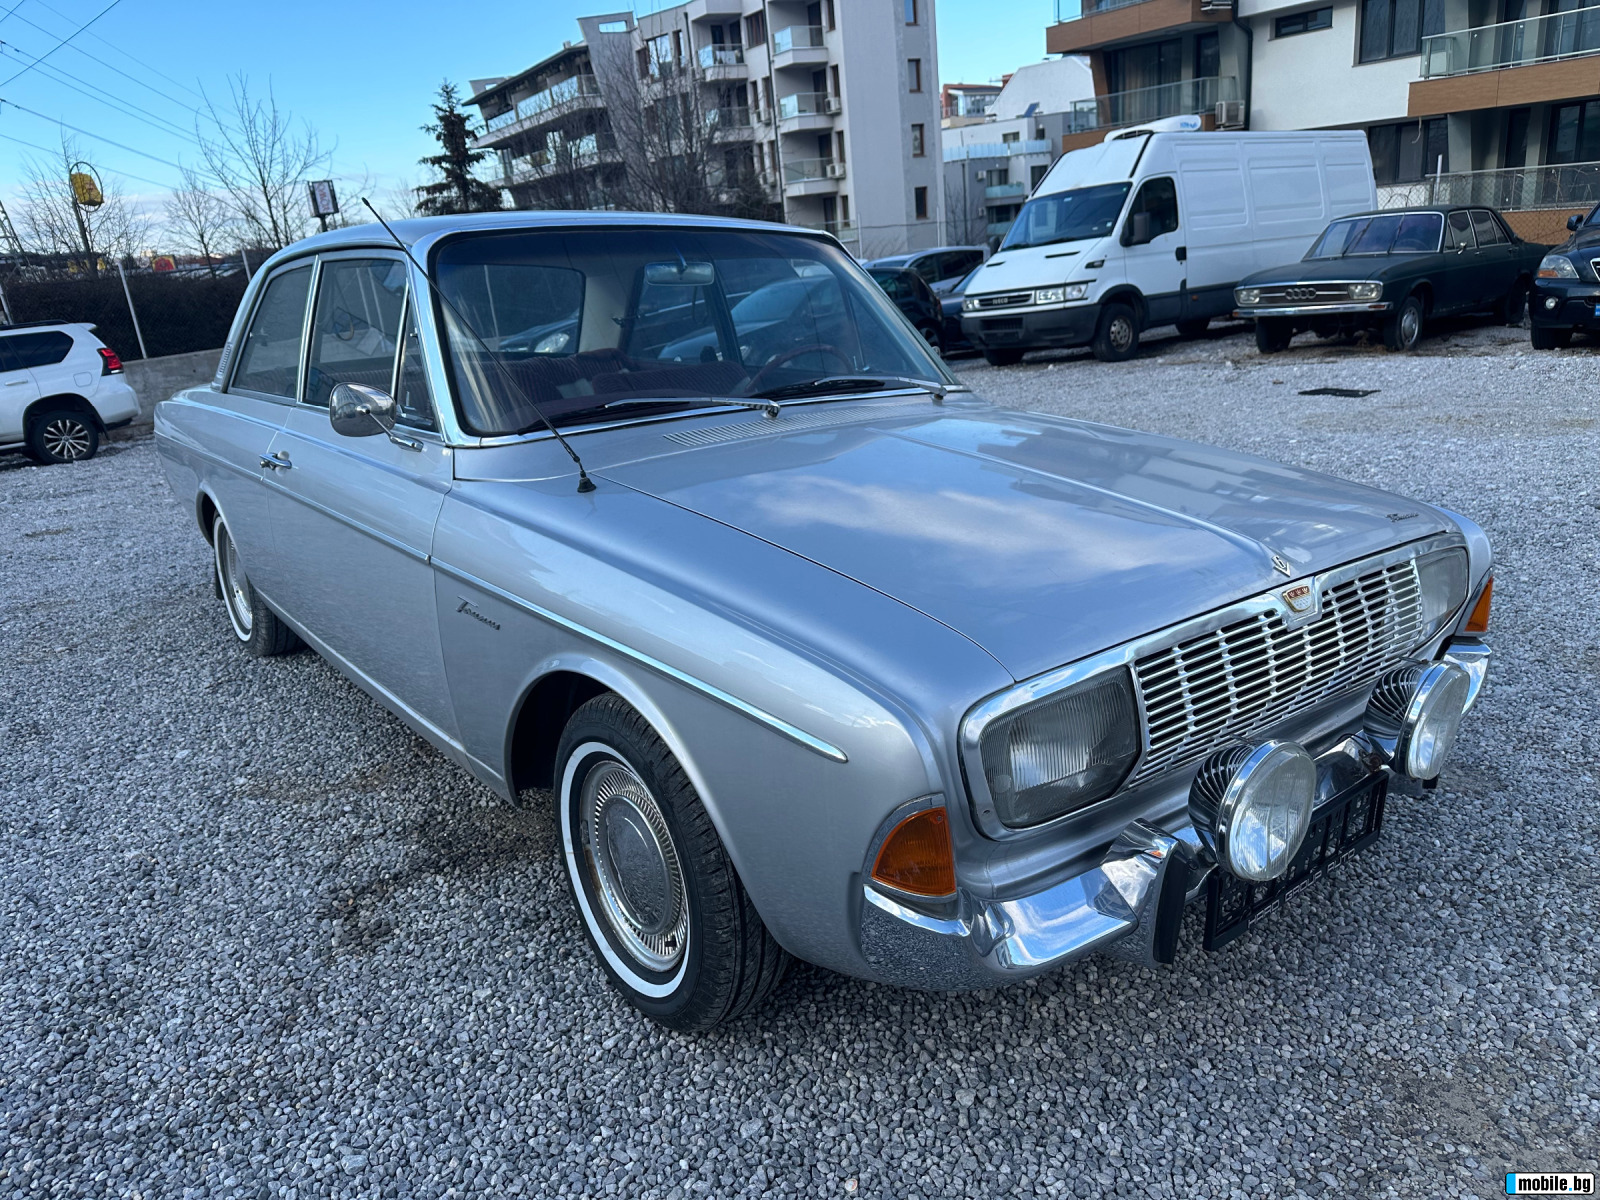 Ford 20m FORD COUPE 231 TAUNUS 20 M Ts | Mobile.bg   3